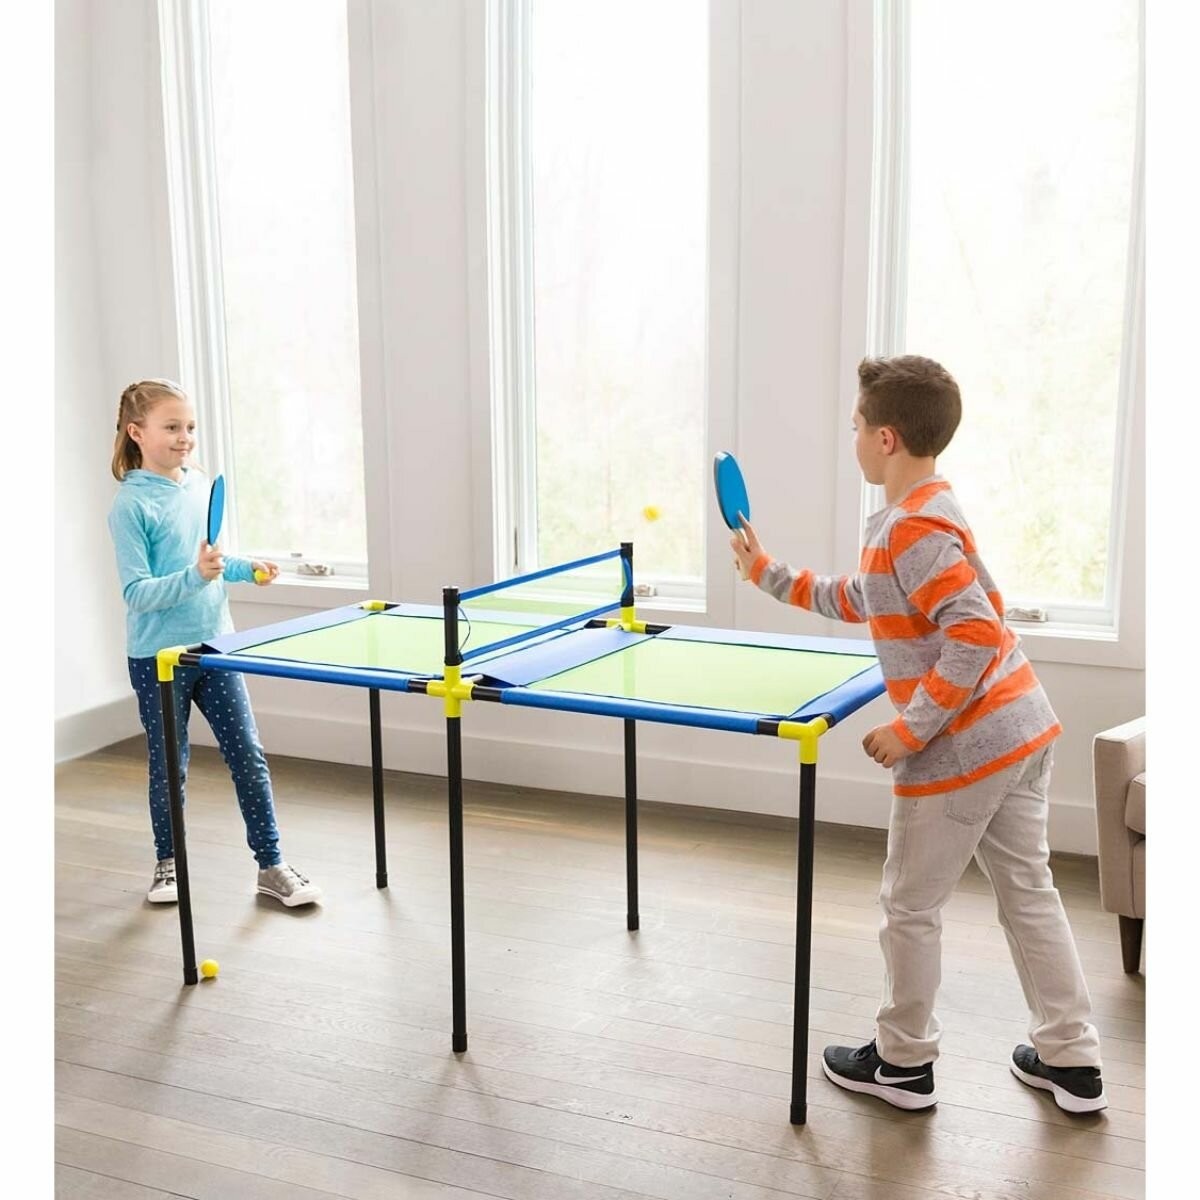 Portable Foldable Indoor/Outdoor Table Tennis Table with Paddles and Balls (25mm Thick)